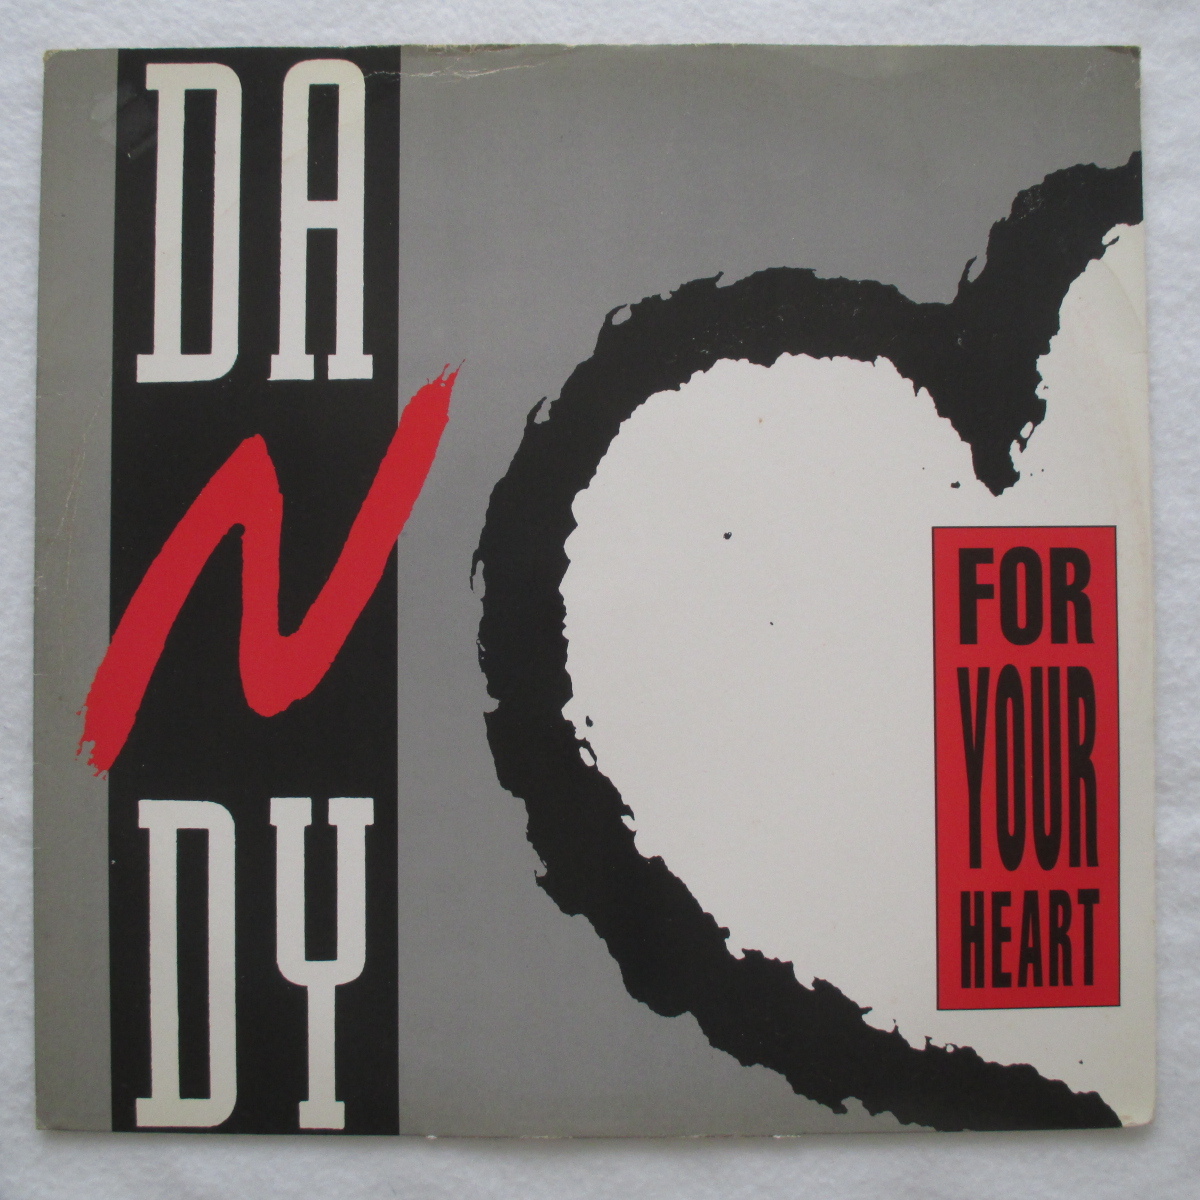 ◇12：ITALY◇ DANDY / FOR YOUR HEARTの画像1